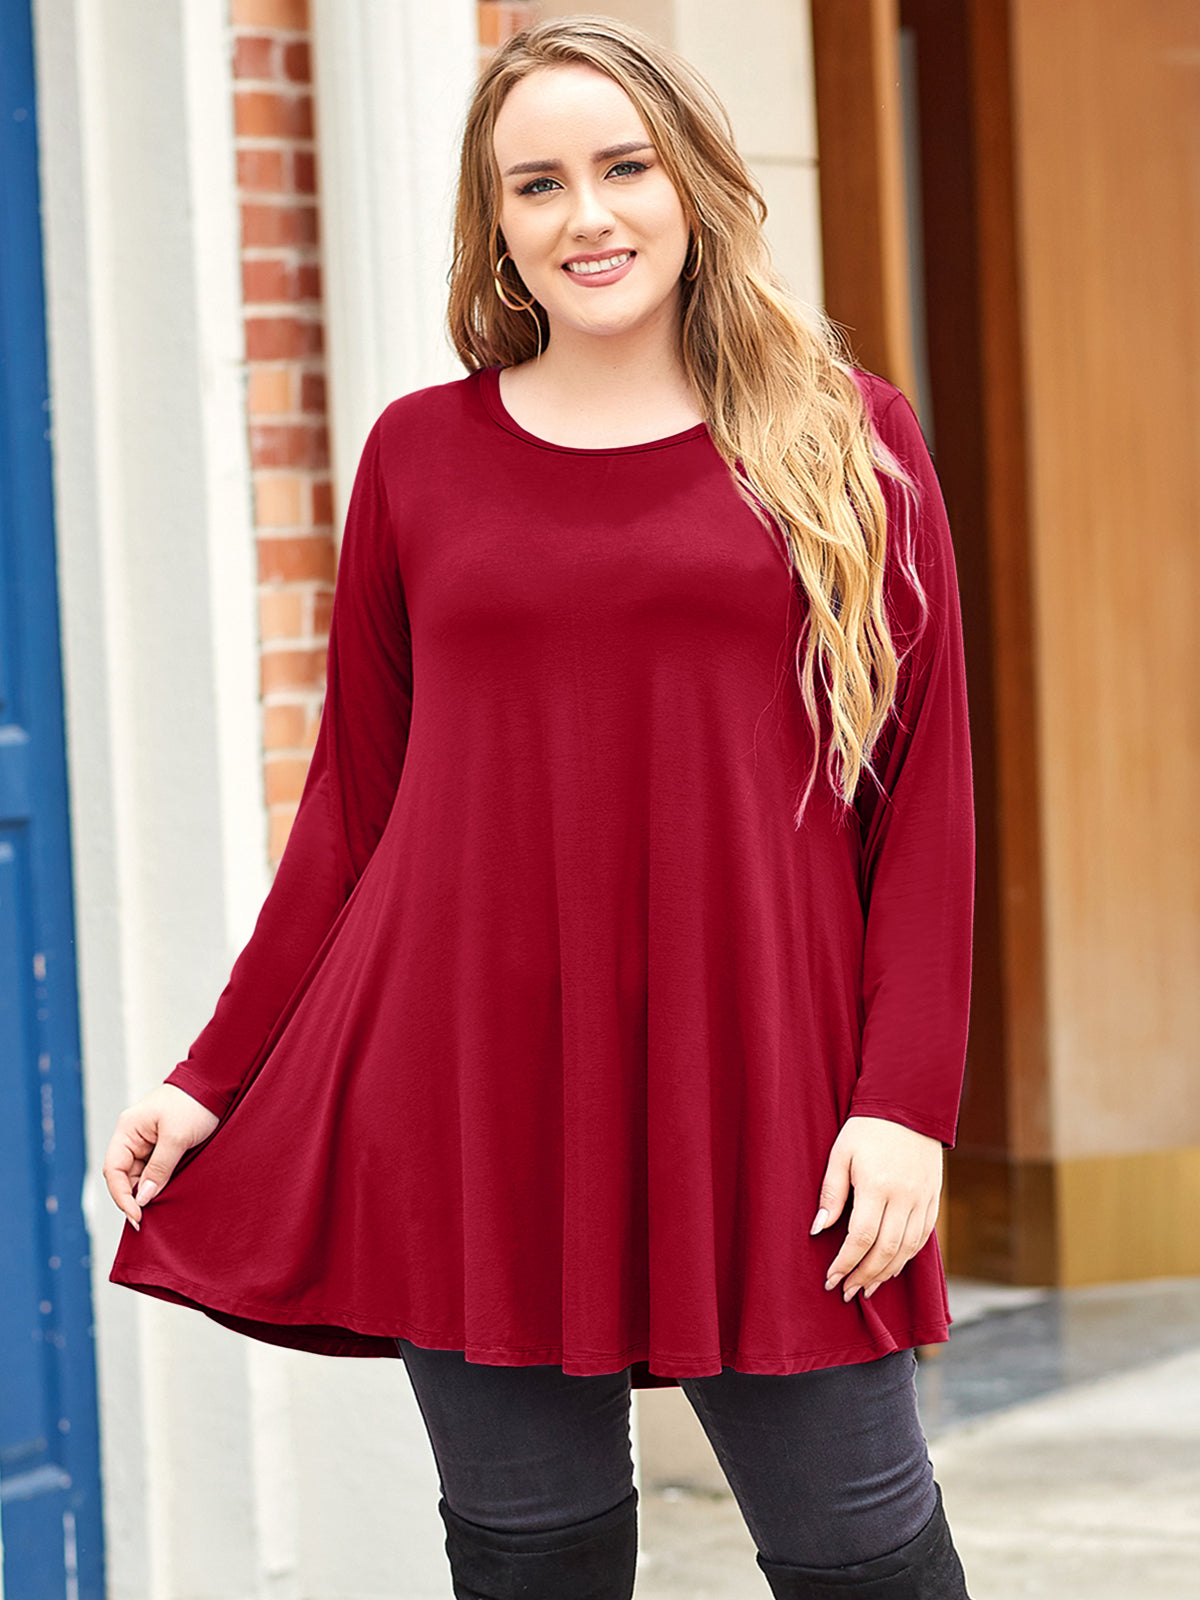 Funfash Plus Size Red Womens Top 3/4 Sleeve Flowy Tunic Dress